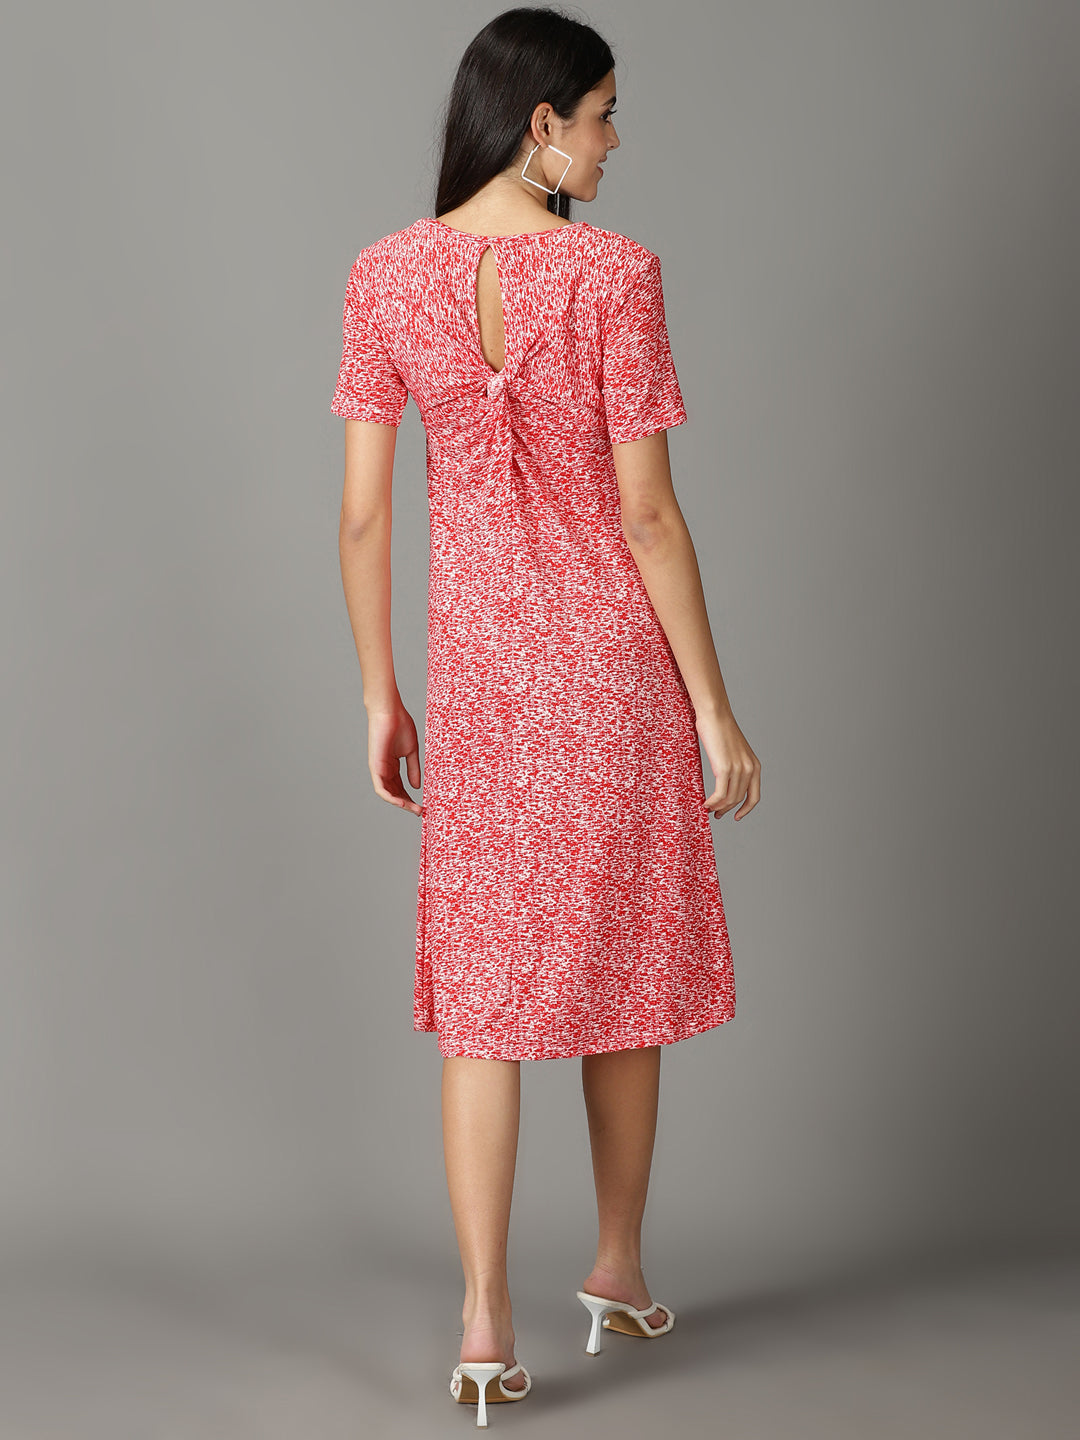 Women's Red Printed A-Line Dress